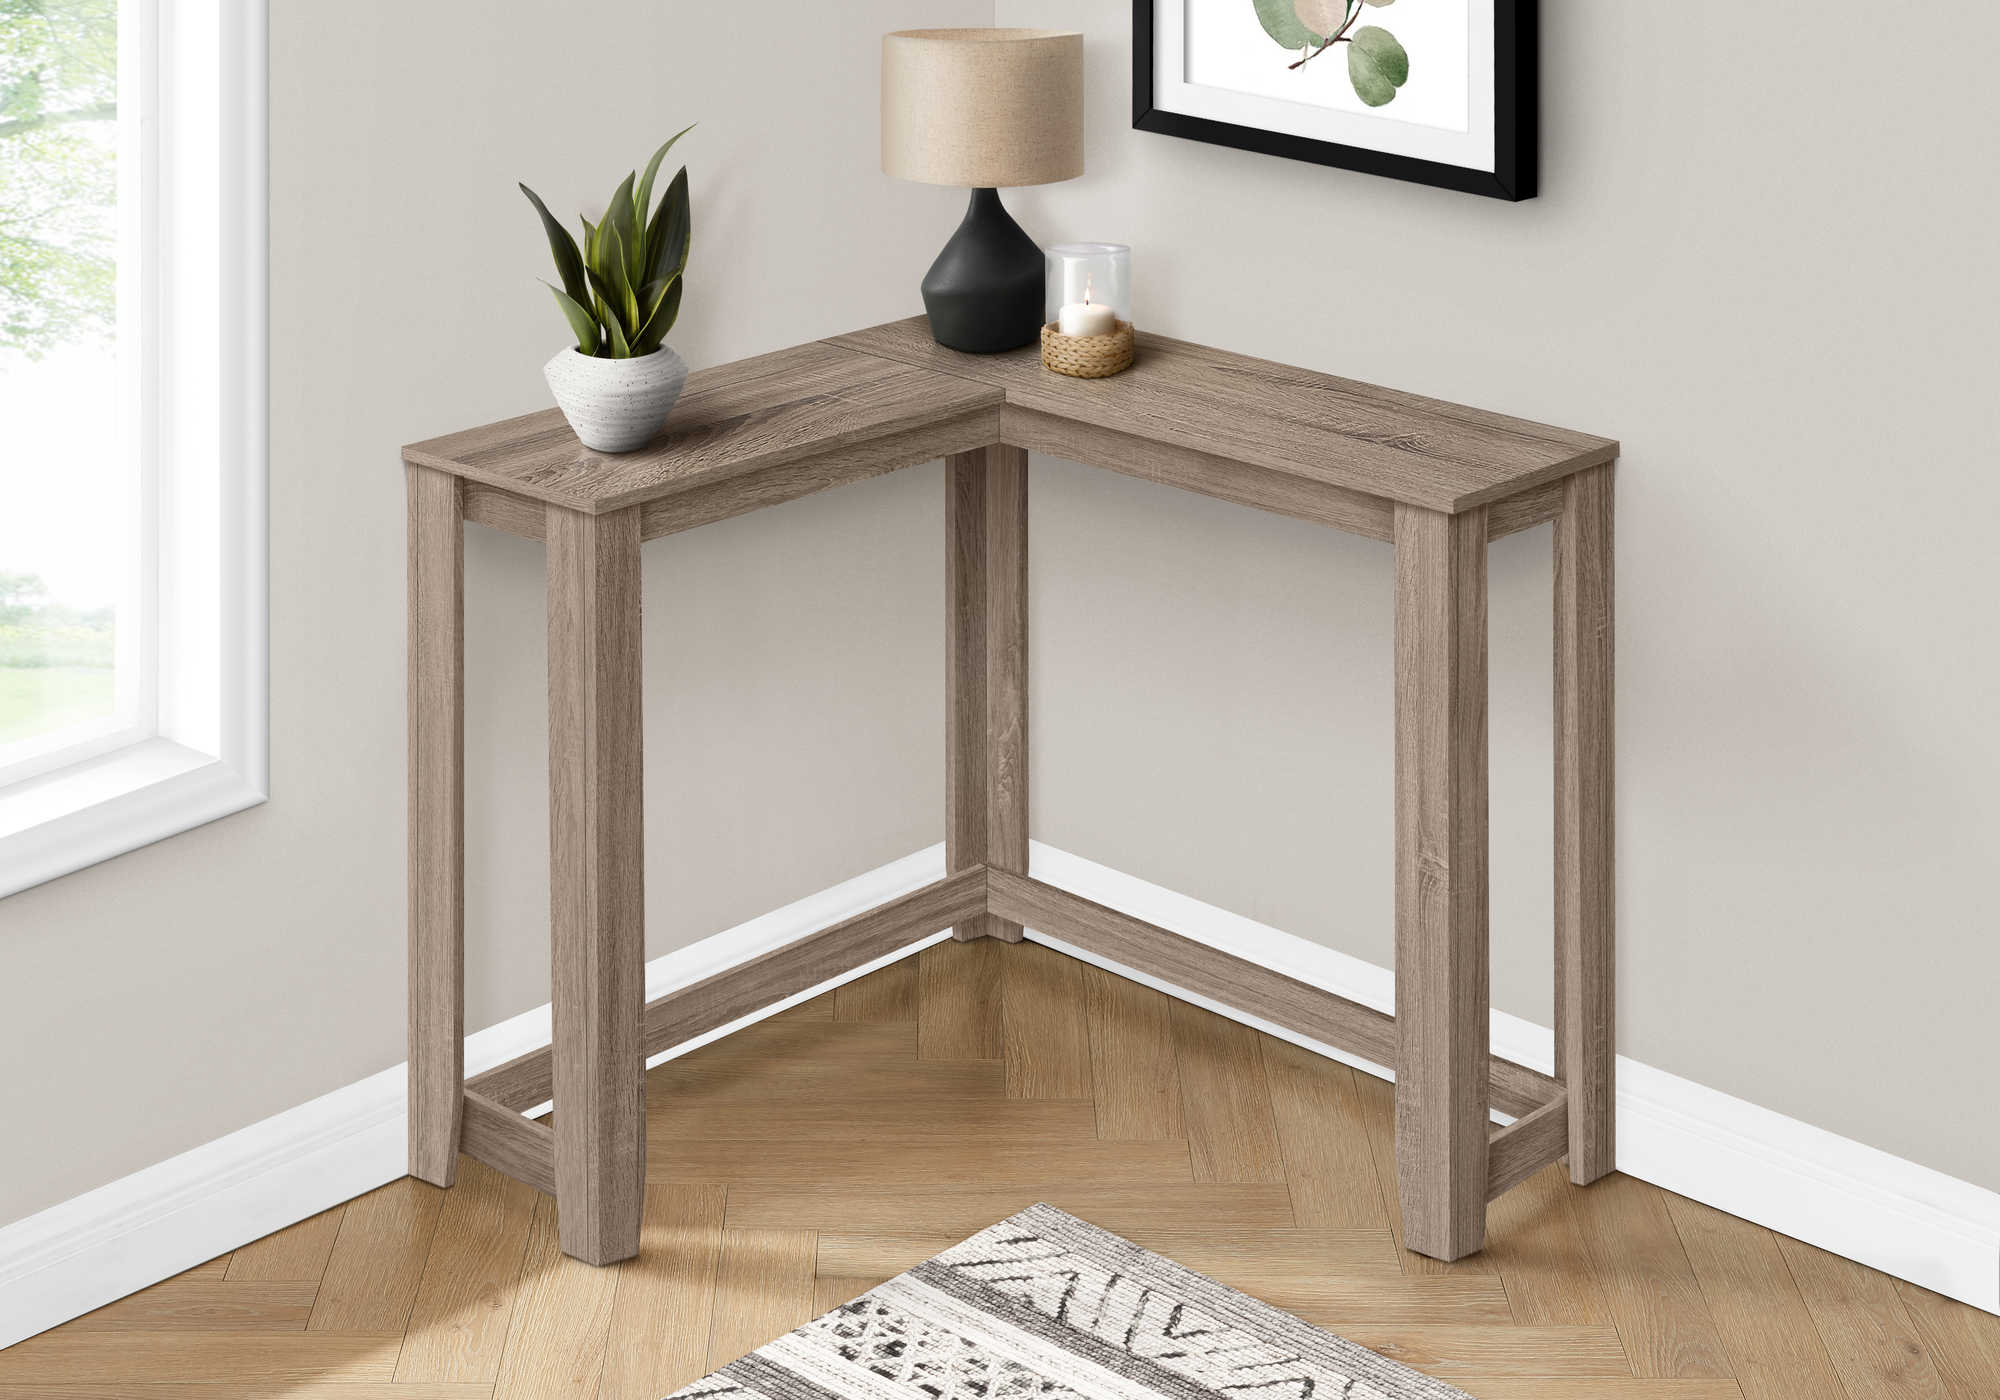 BEDROOM ACCENT CONSOLE TABLE - 36" / DARK TAUPE CORNER CONSOLE